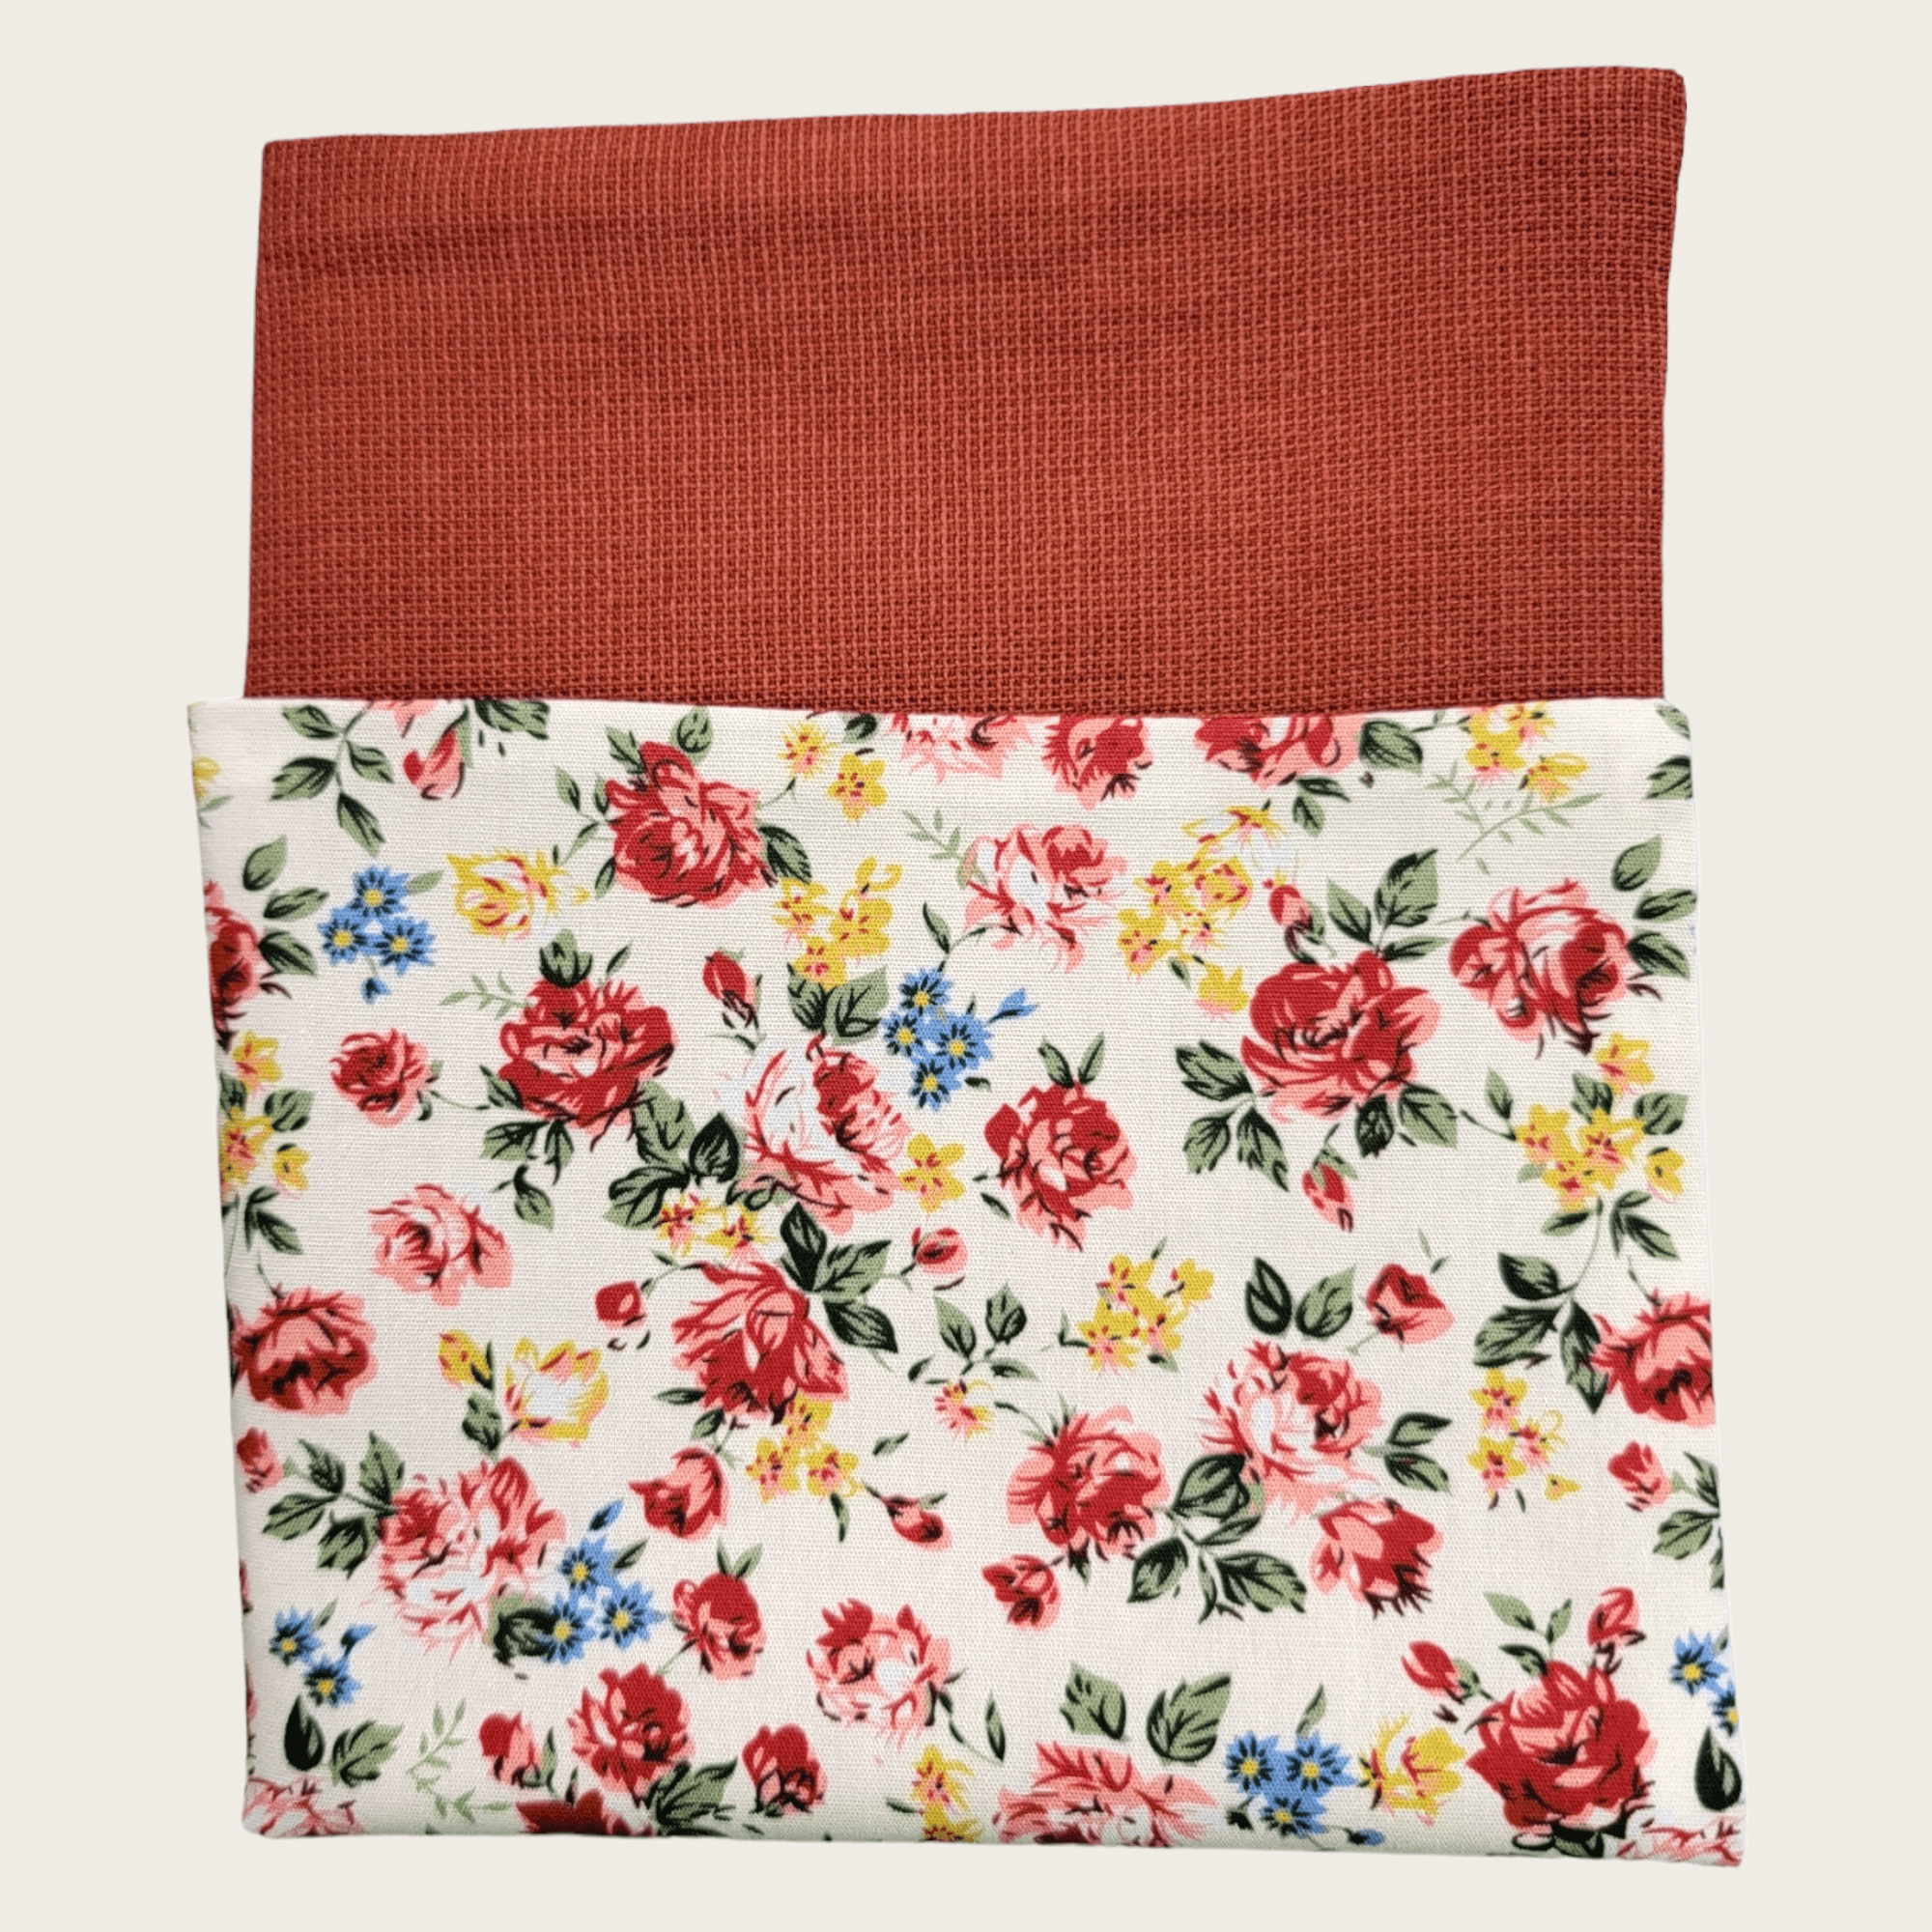 Ivory Brick Red Floral Reversible Pocket Square - STYLETIE